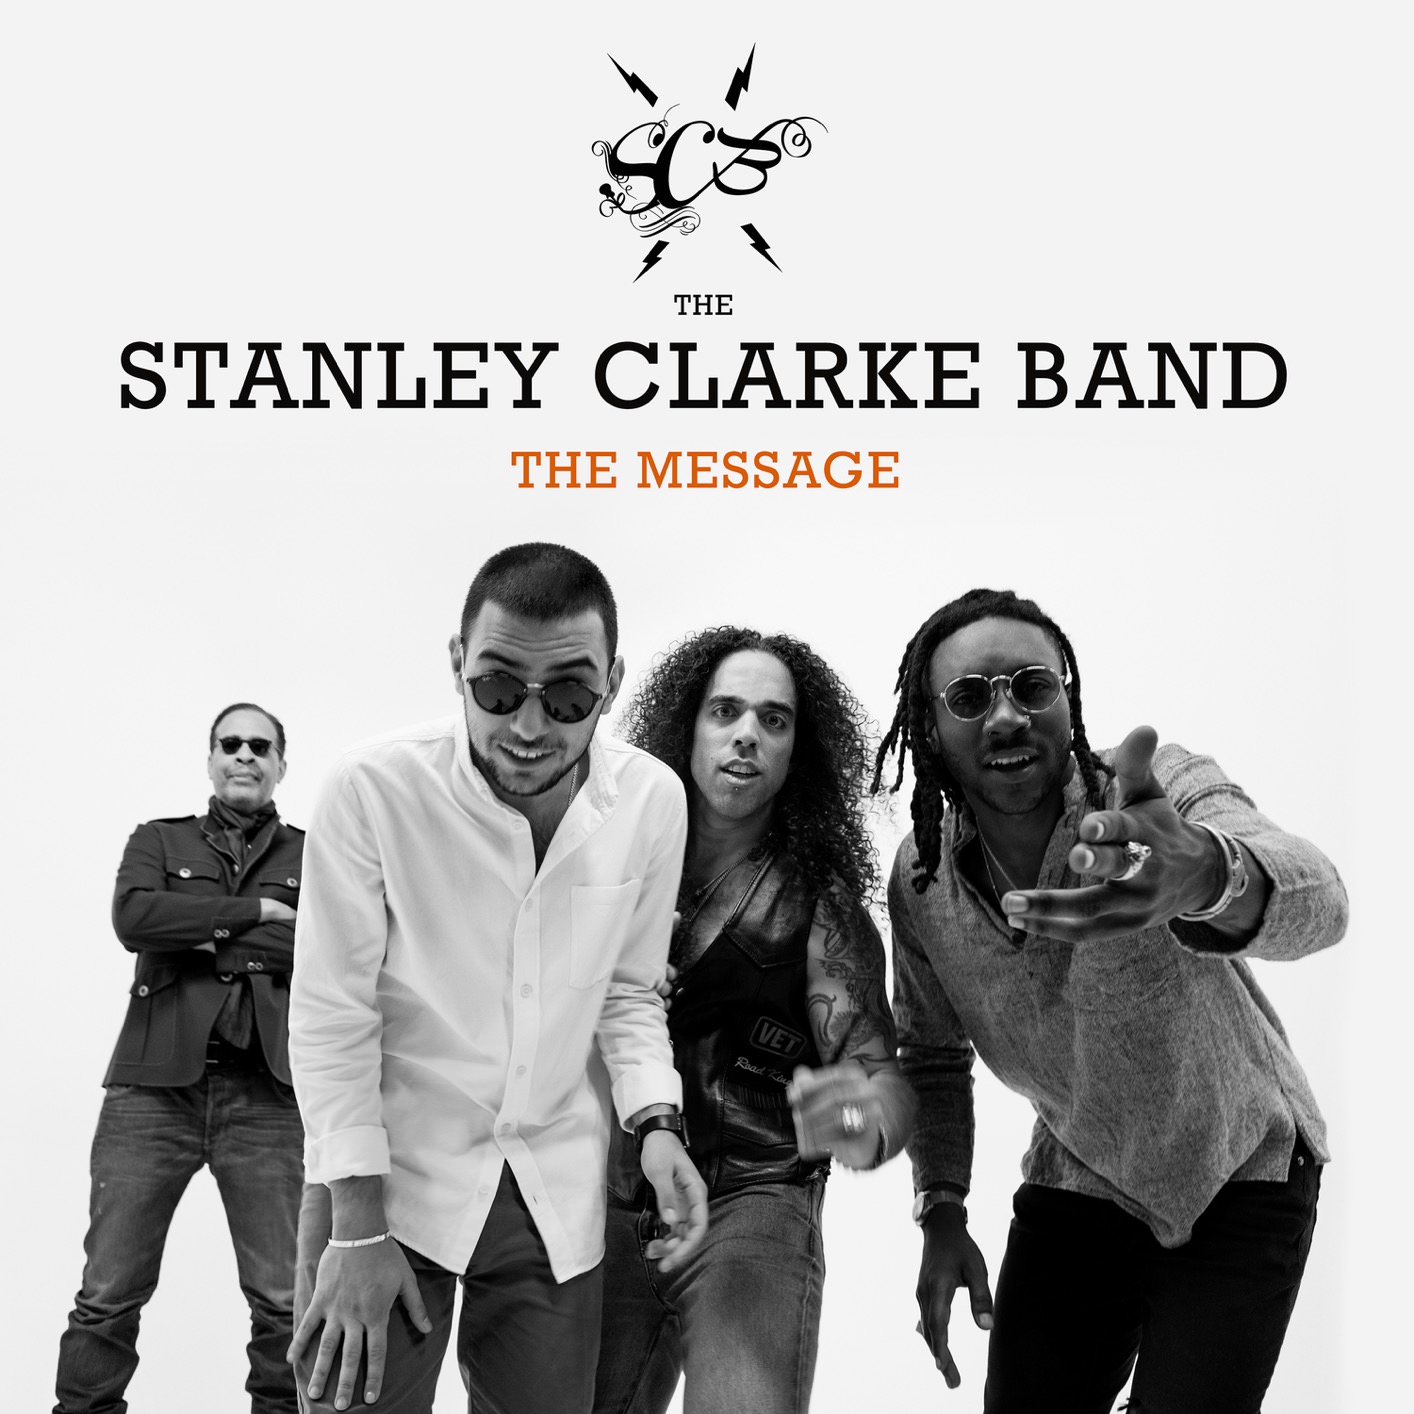 The Stanley Clarke Band - The Message (2018) [FLAC 24bit/44,1kHz]